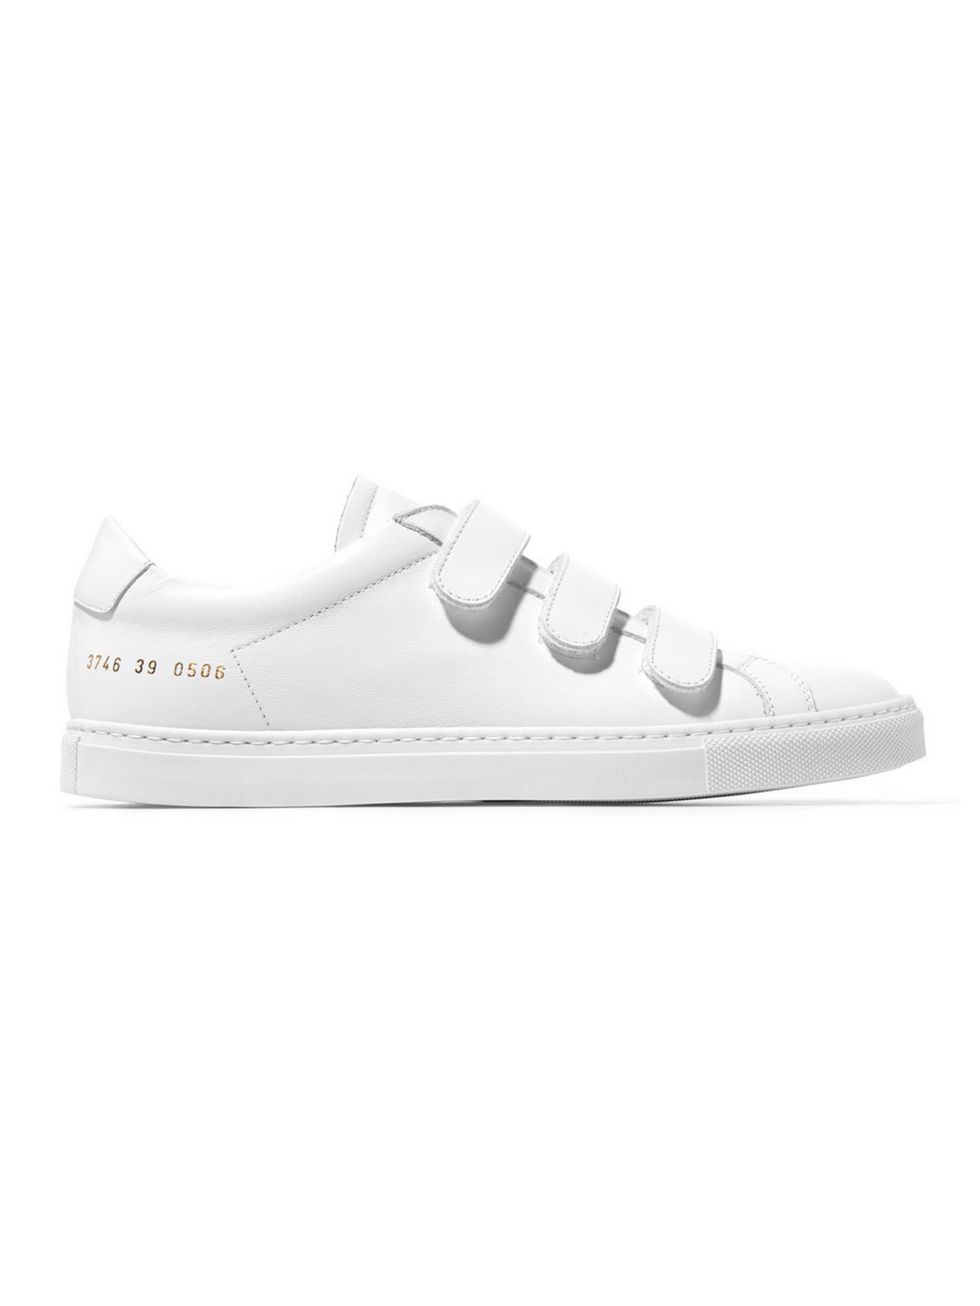 Footwear, Shoe, Product, White, Style, Sneakers, Line, Light, Logo, Athletic shoe, 